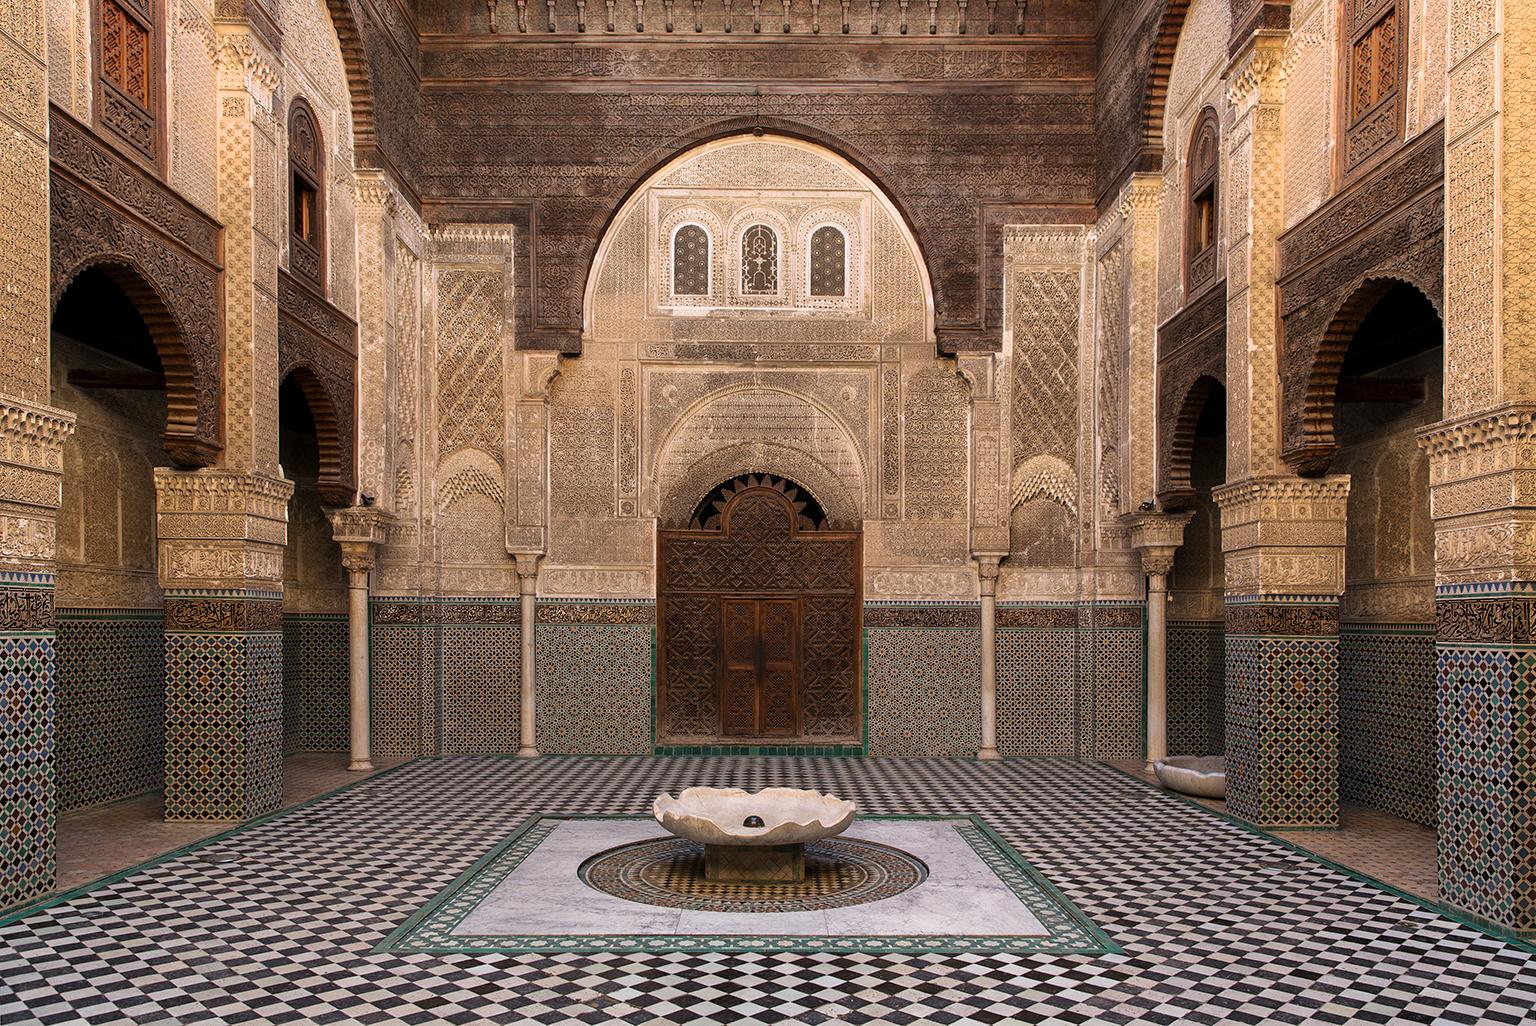 Islamic architectural detail of the Medersa courtyard, Fez, Morocco, 2016
Photograph by Cosmo Condina. Courtyard of the Medersa.
Archival pigment print 19 X 12.6 in.  Edition of 10. This is # 3/10 in the edition.

The Bou Inania Medersa built